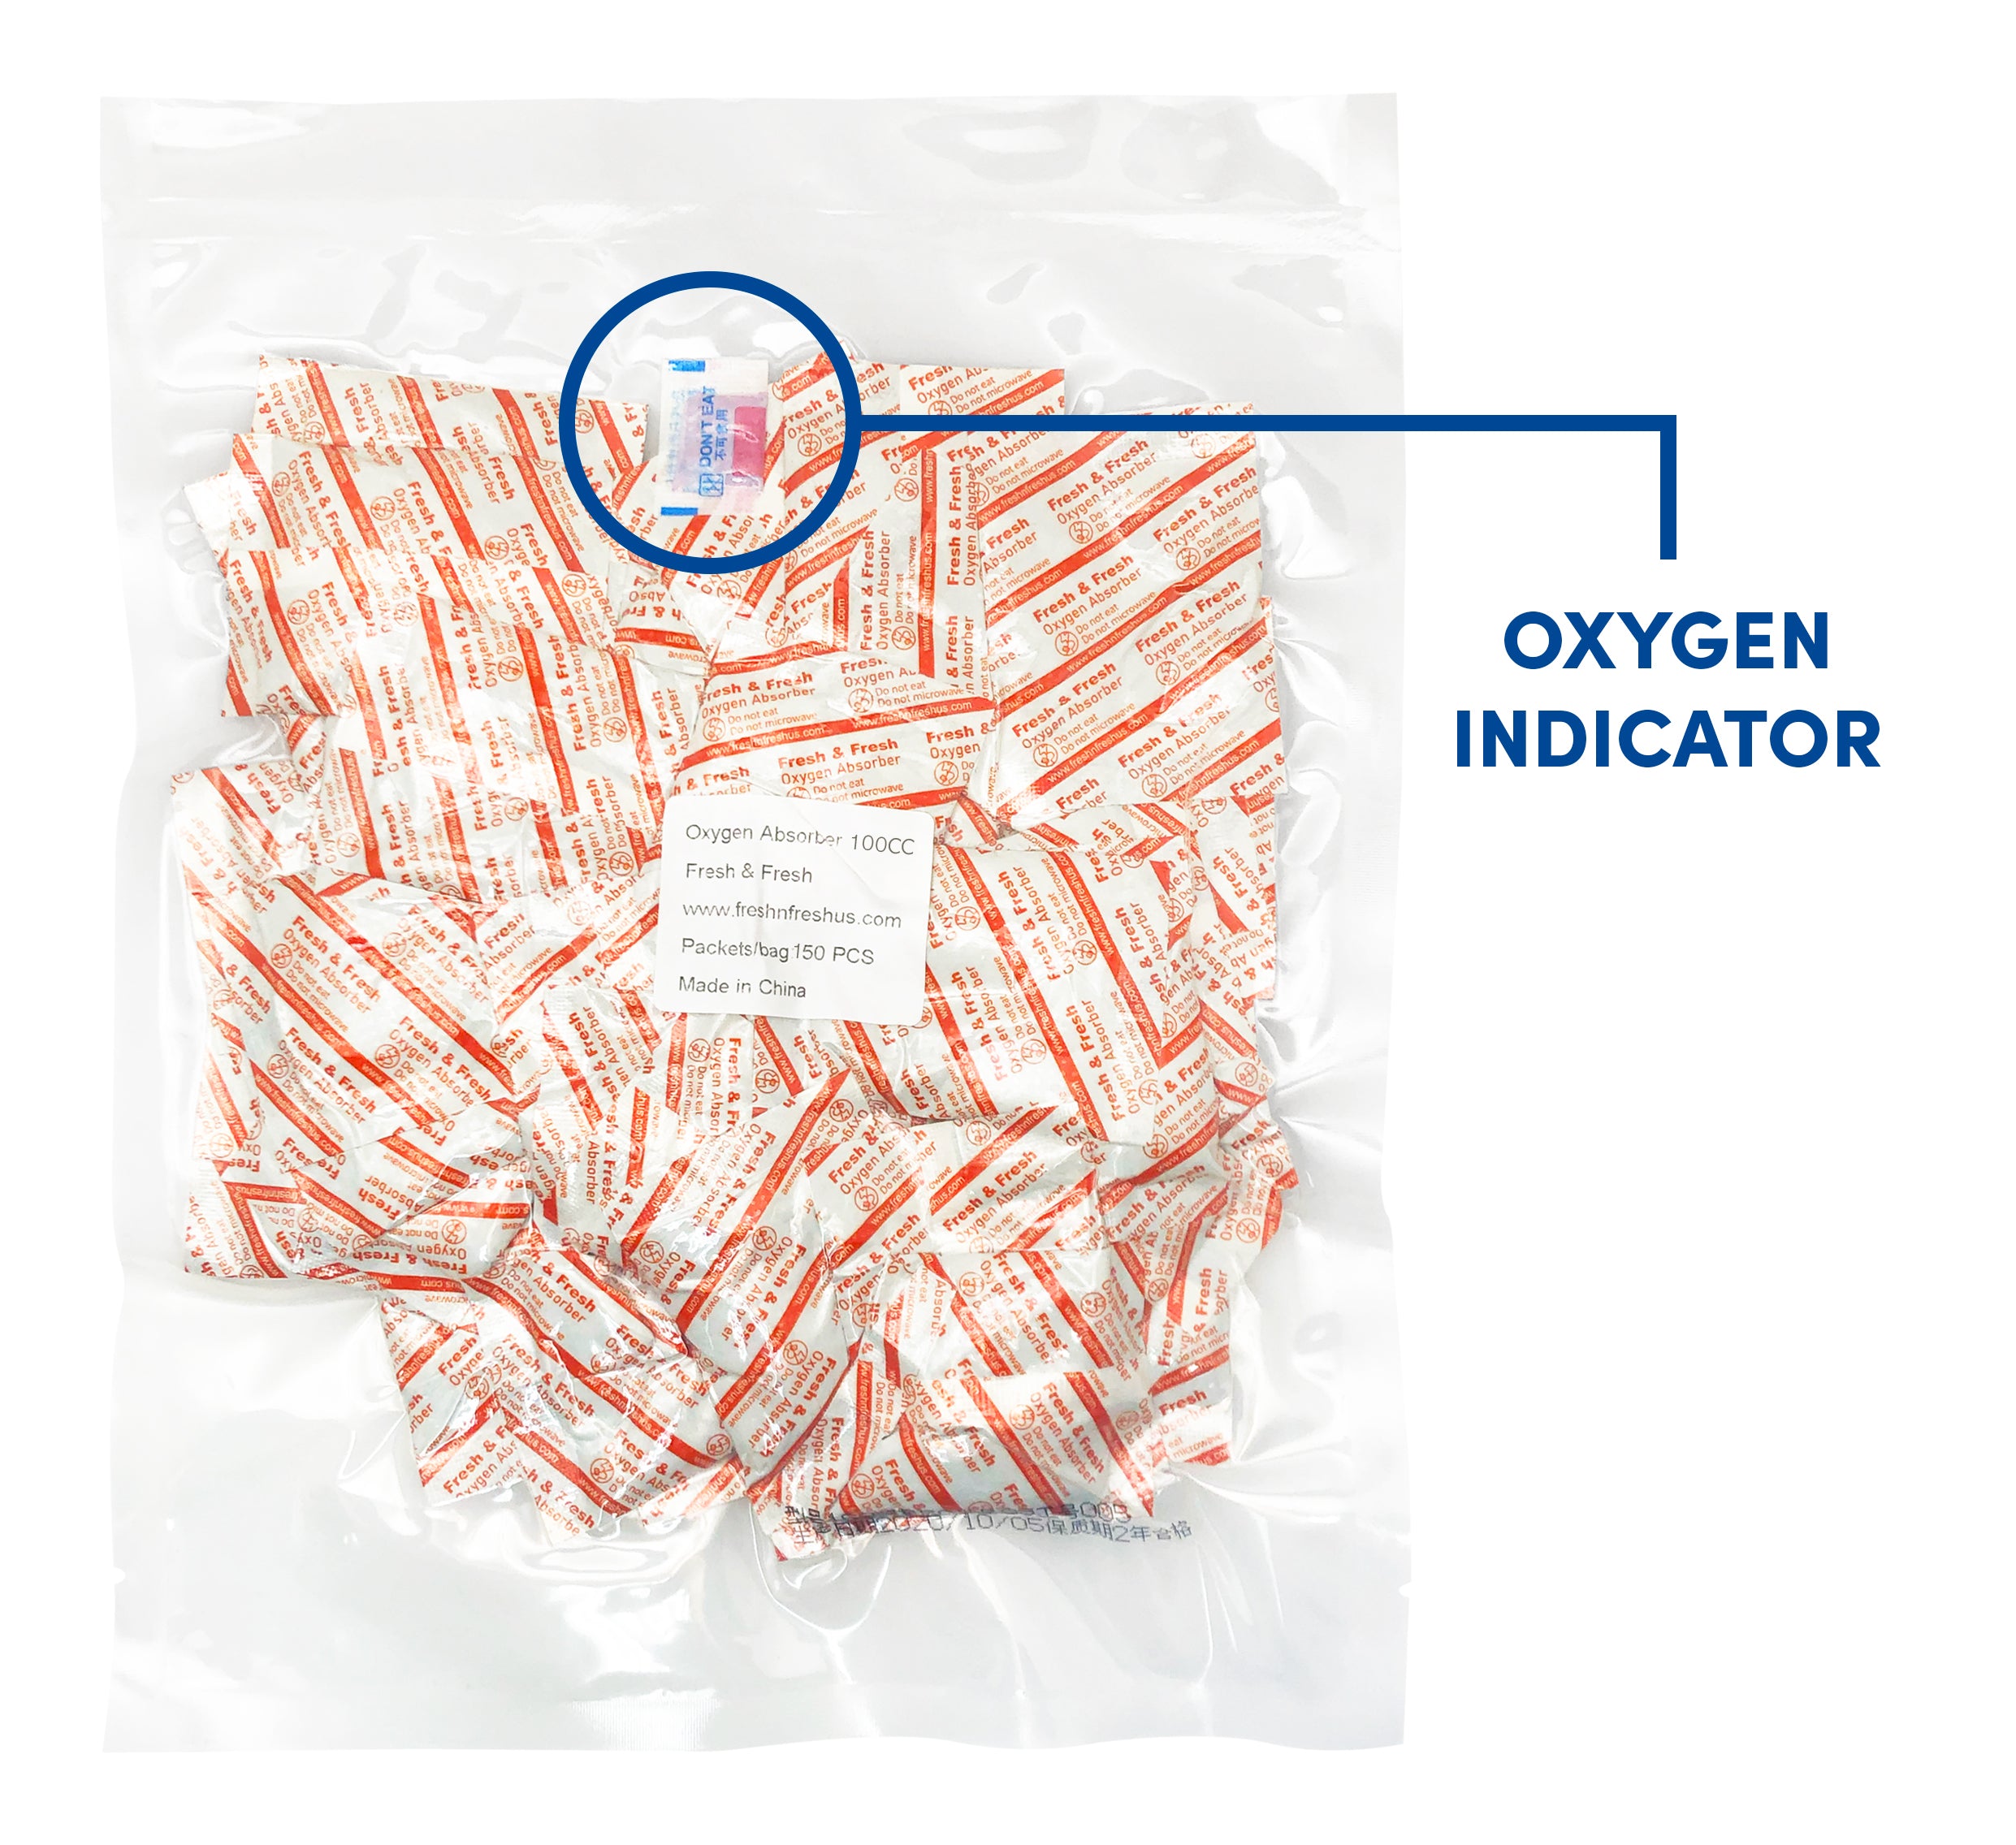 Fresh & Fresh (150 Packs) 100 CC Premium Oxygen Absorbers(1 Bag of 150 packets) - ISO 9001 Certified Facility Manufactured